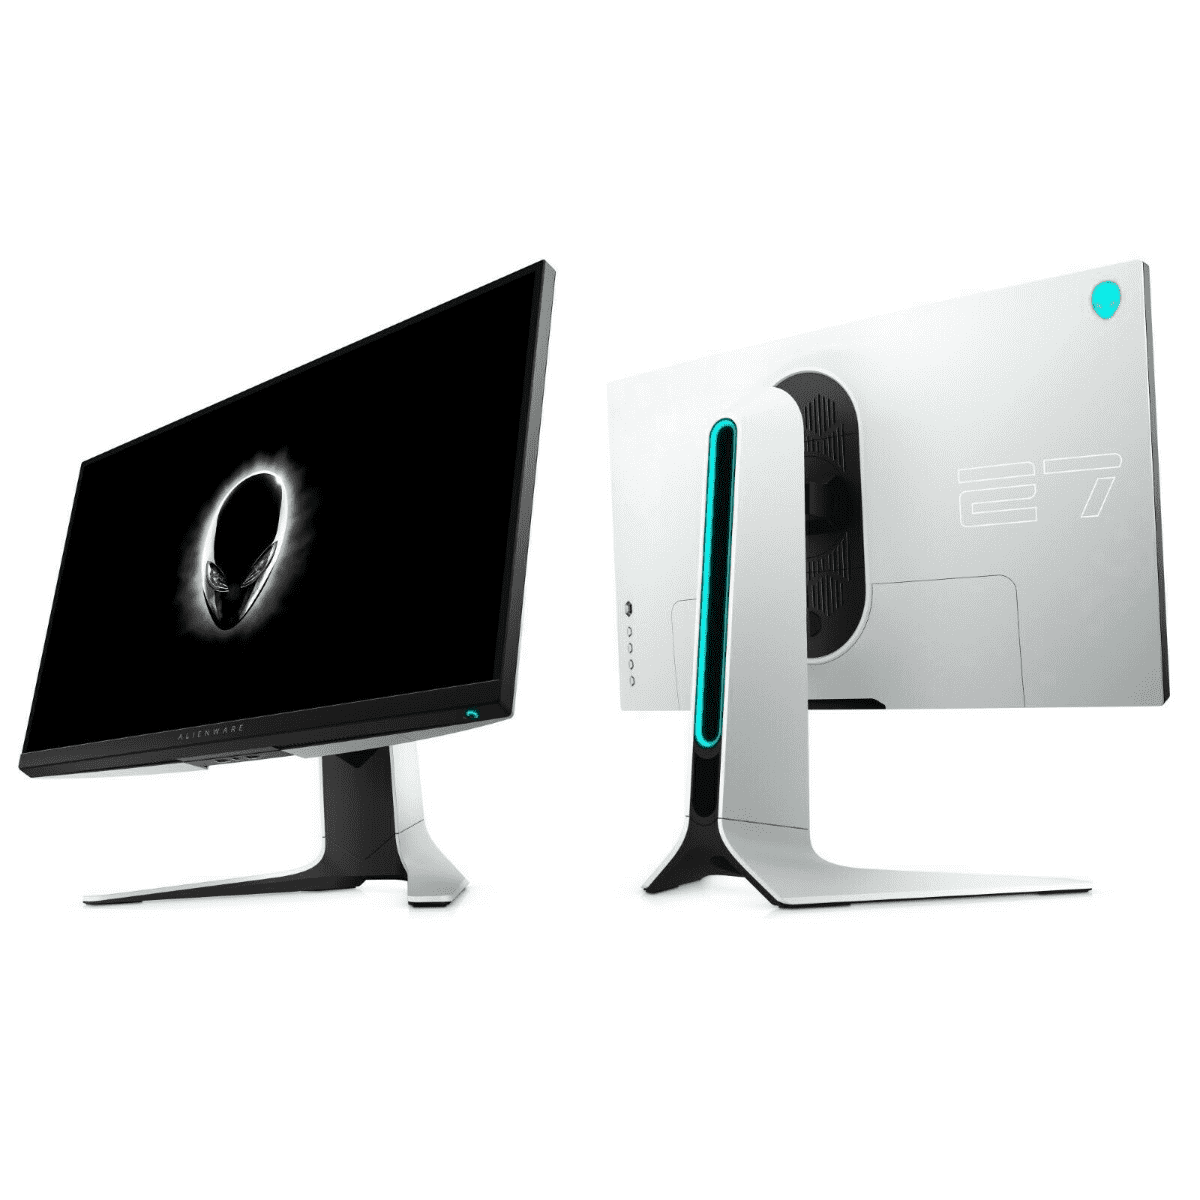 Alienware AW2720HF 27 Inch Full HD Gaming Monitor - Black and White - Grade B